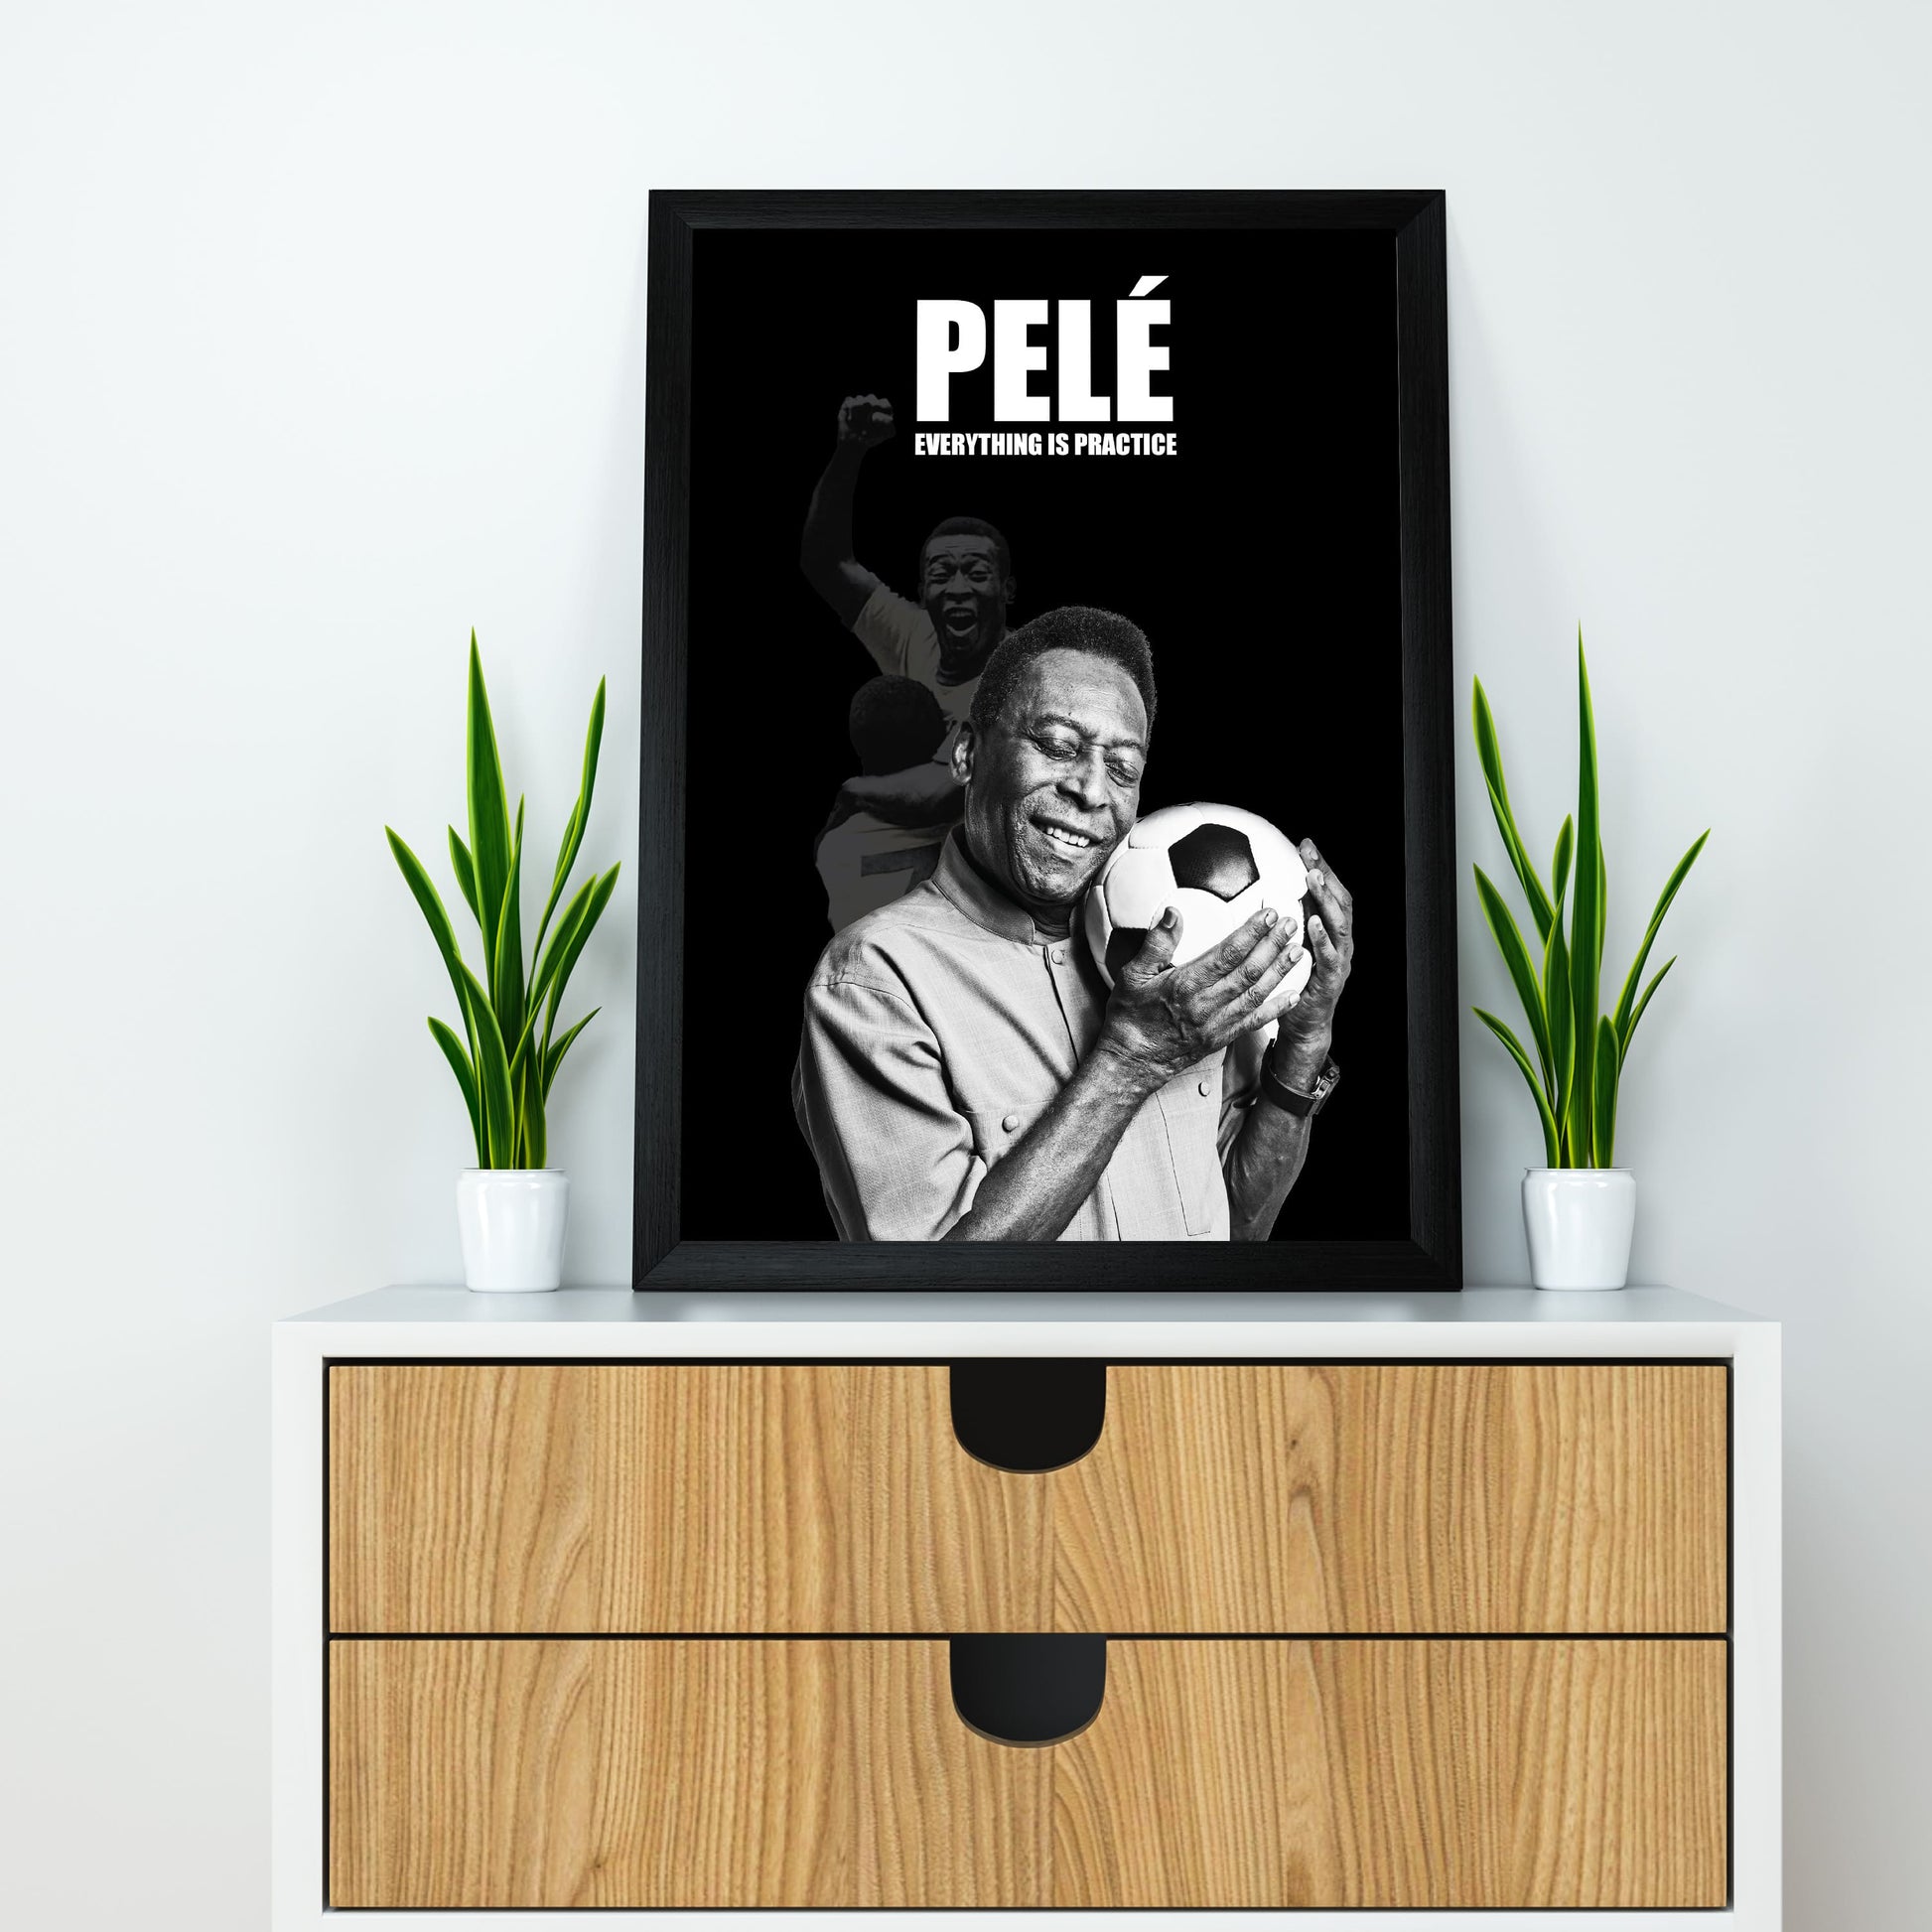 Pele Everything is Practice Quote Poster/Frame/Canvas - BanterBox